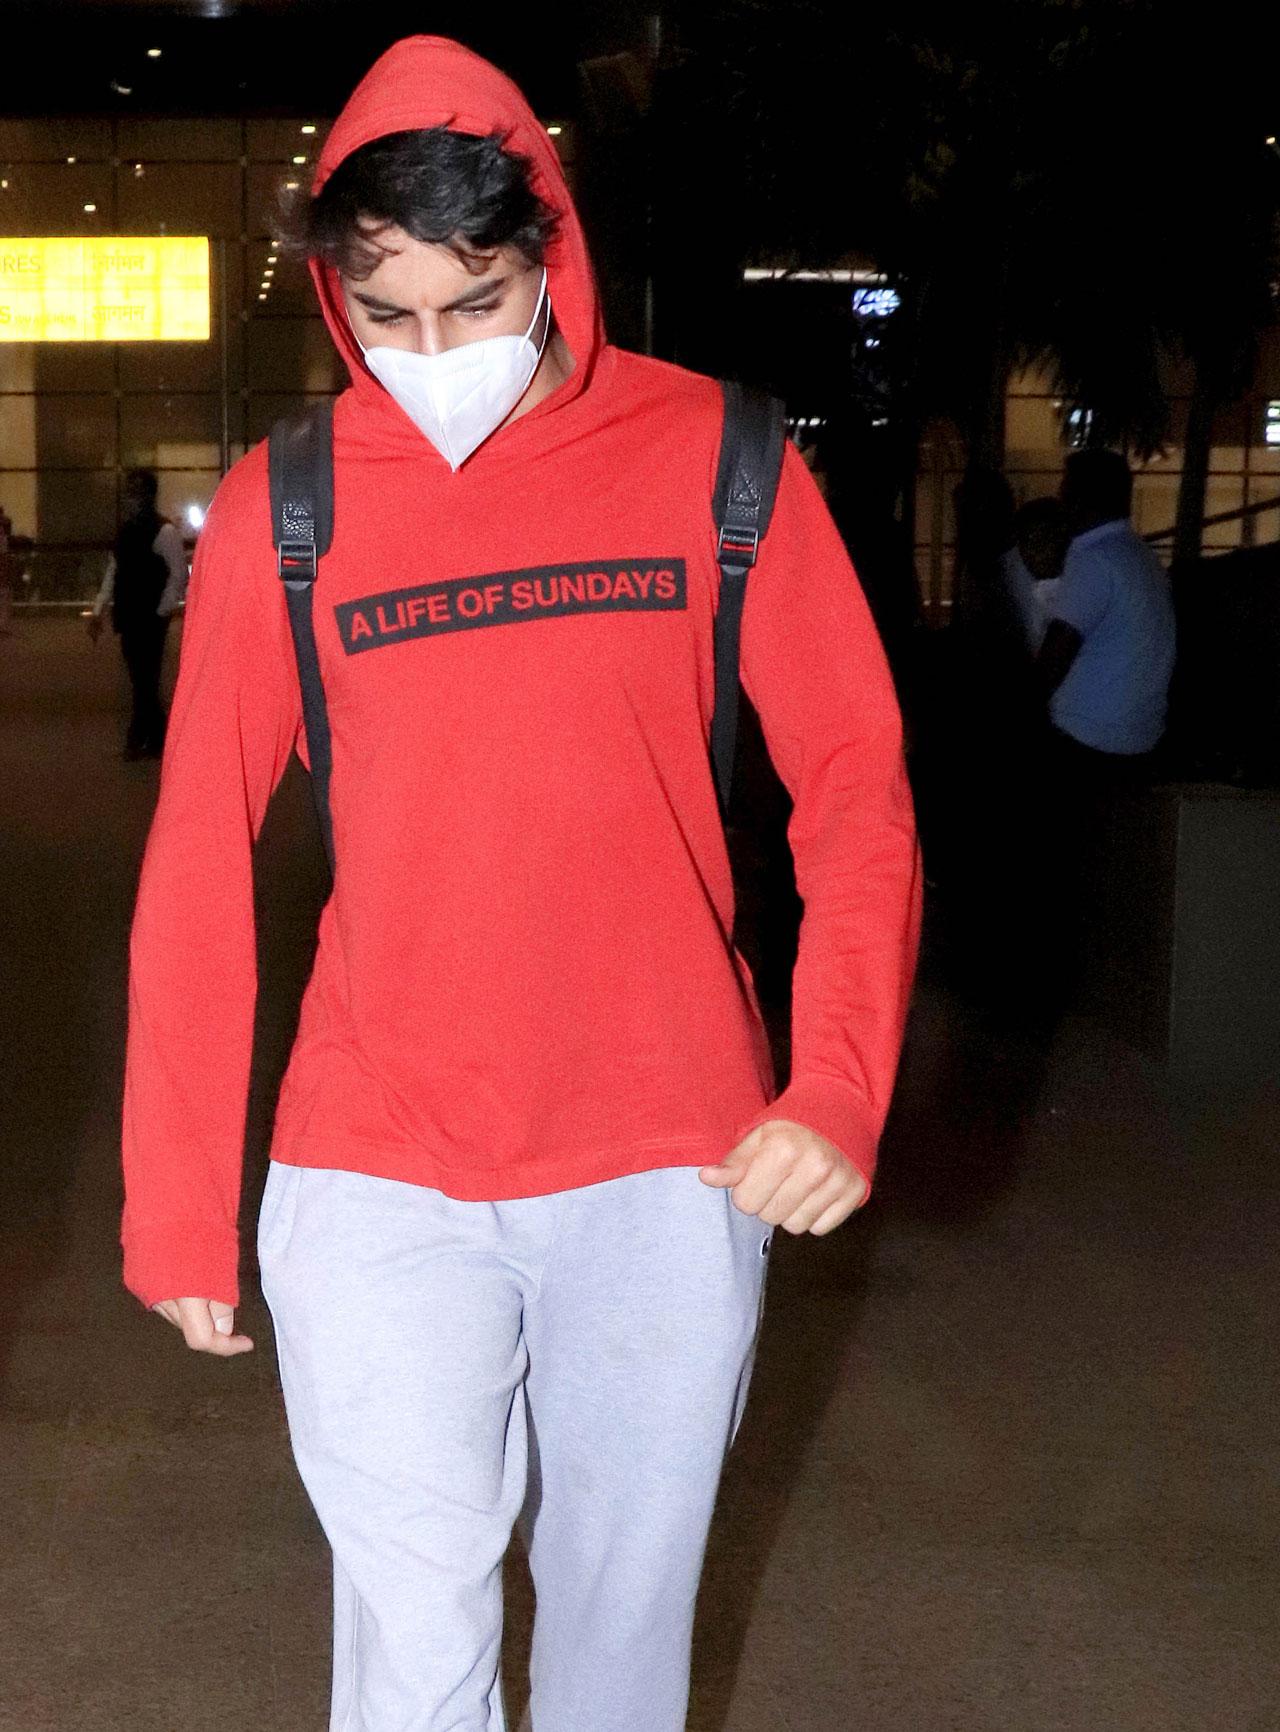 Saif Ali Khan and Amrita Singh's son Ibrahim Ali Khan was also spotted at the Mumbai airport. According to several reports, Ibrahim was returning from Chandigarh were he attended a wedding. 